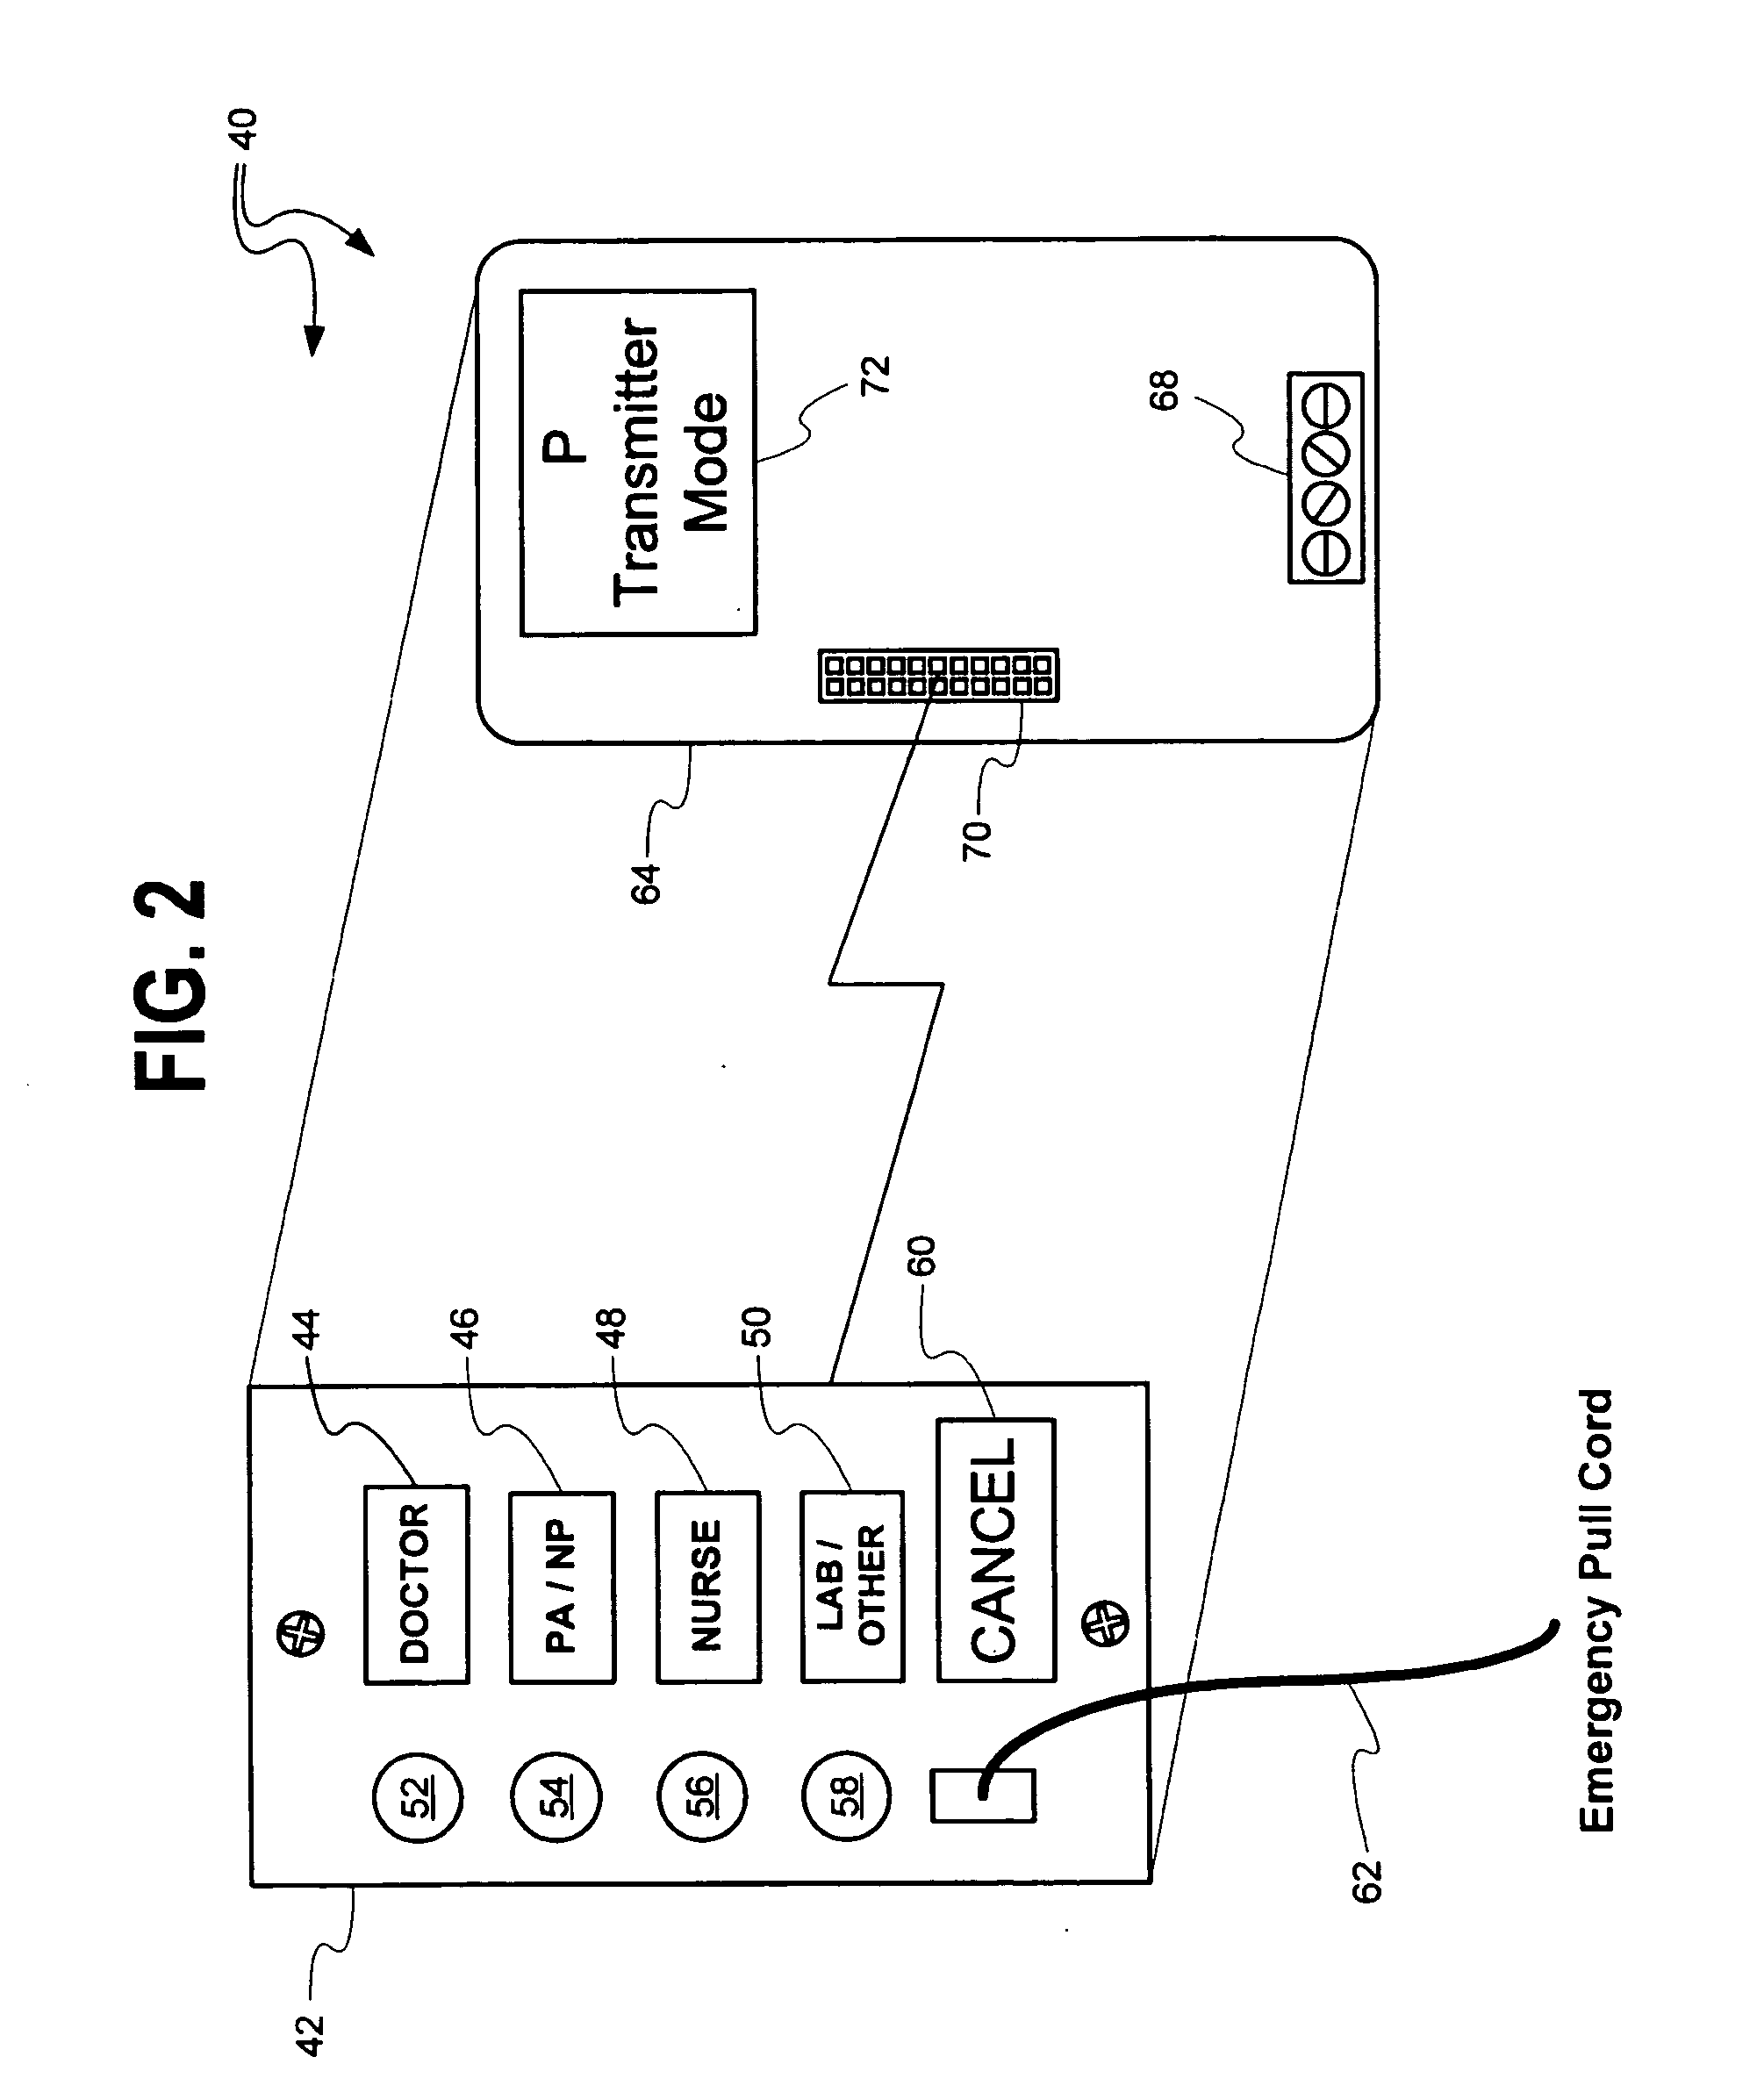 Medical facility information management apparatus and method